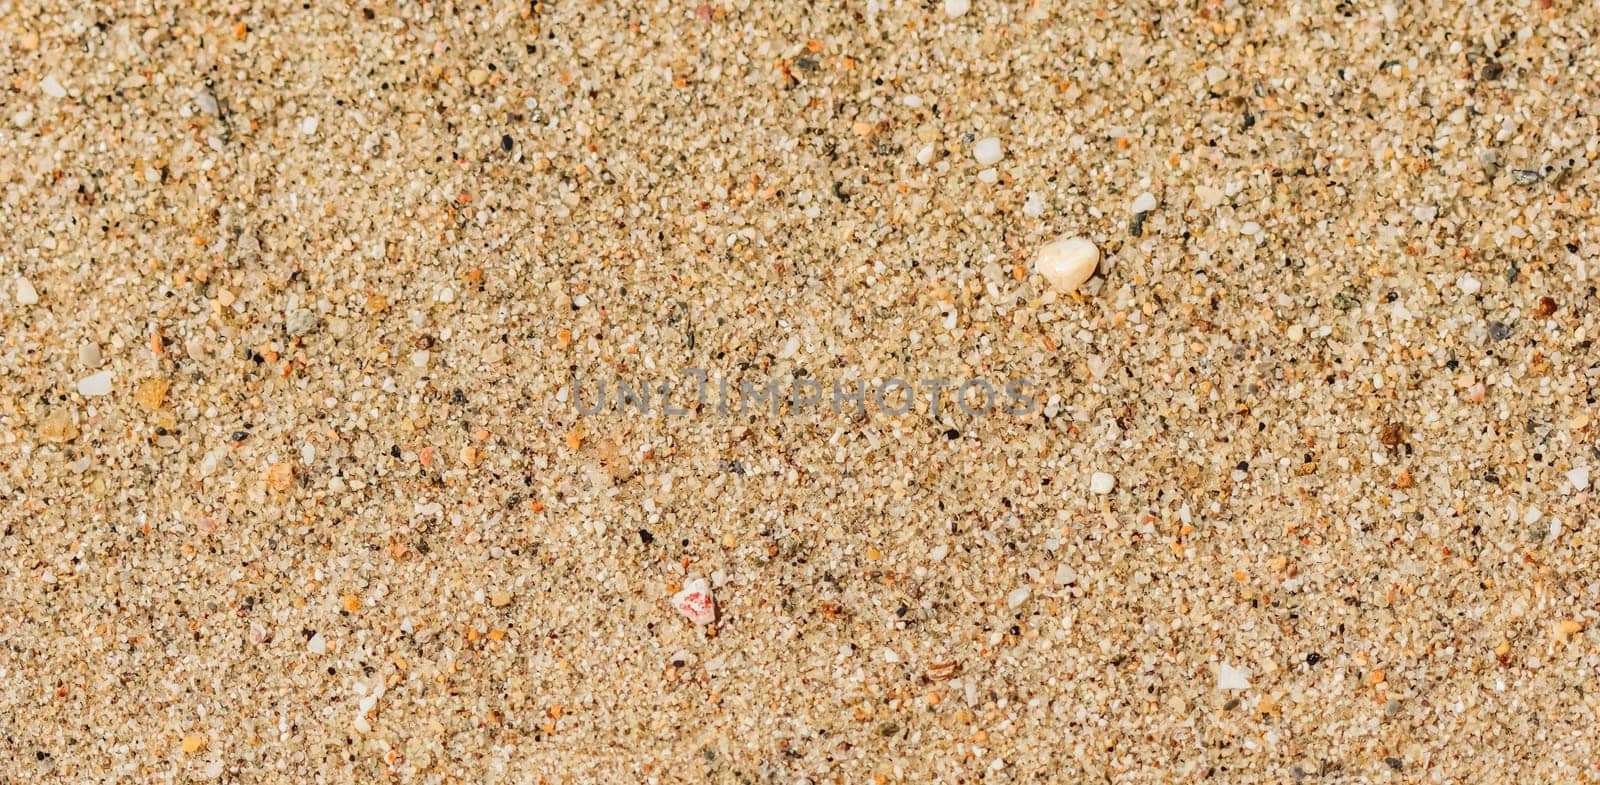 A background of sand, small pebbles and flowing waves on the sea beach. Summer vacation and coastal nature concept